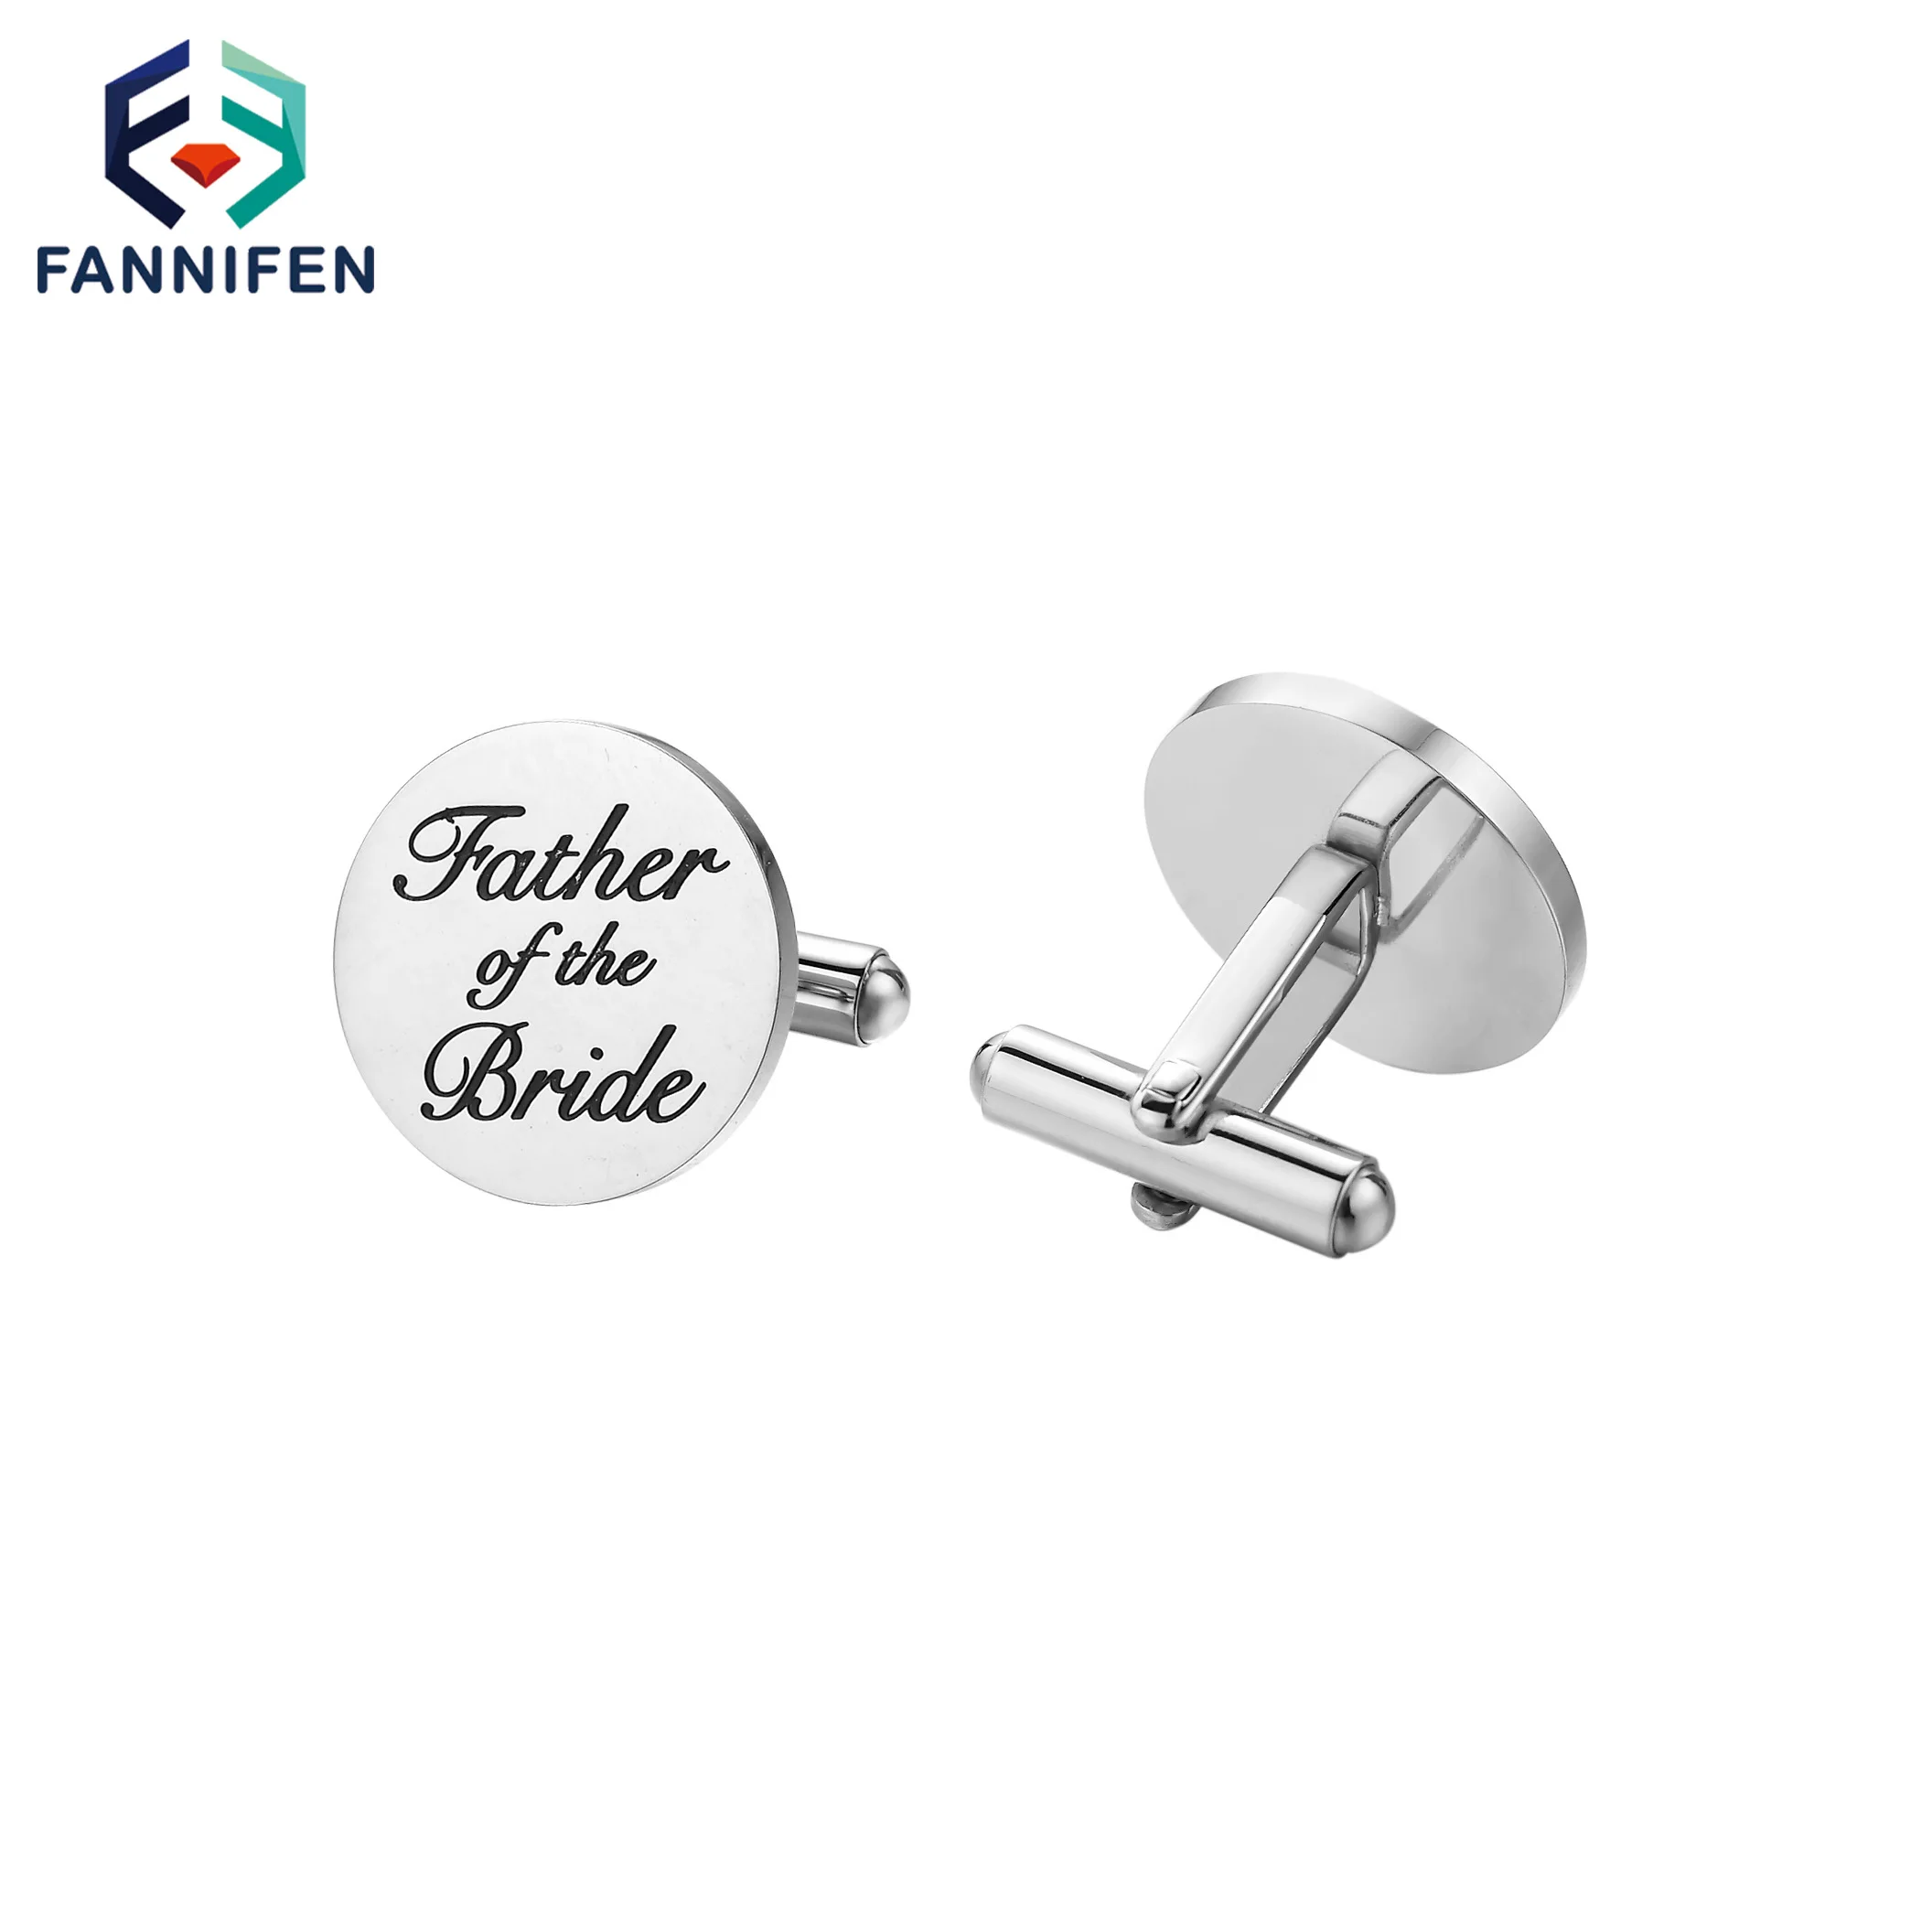 

Men's Jewelry Lawyer Fashion Round Cufflinks Shirt For Mens Luxury Gift For Husband Wedding Tie Clip And Cufflinks For Father